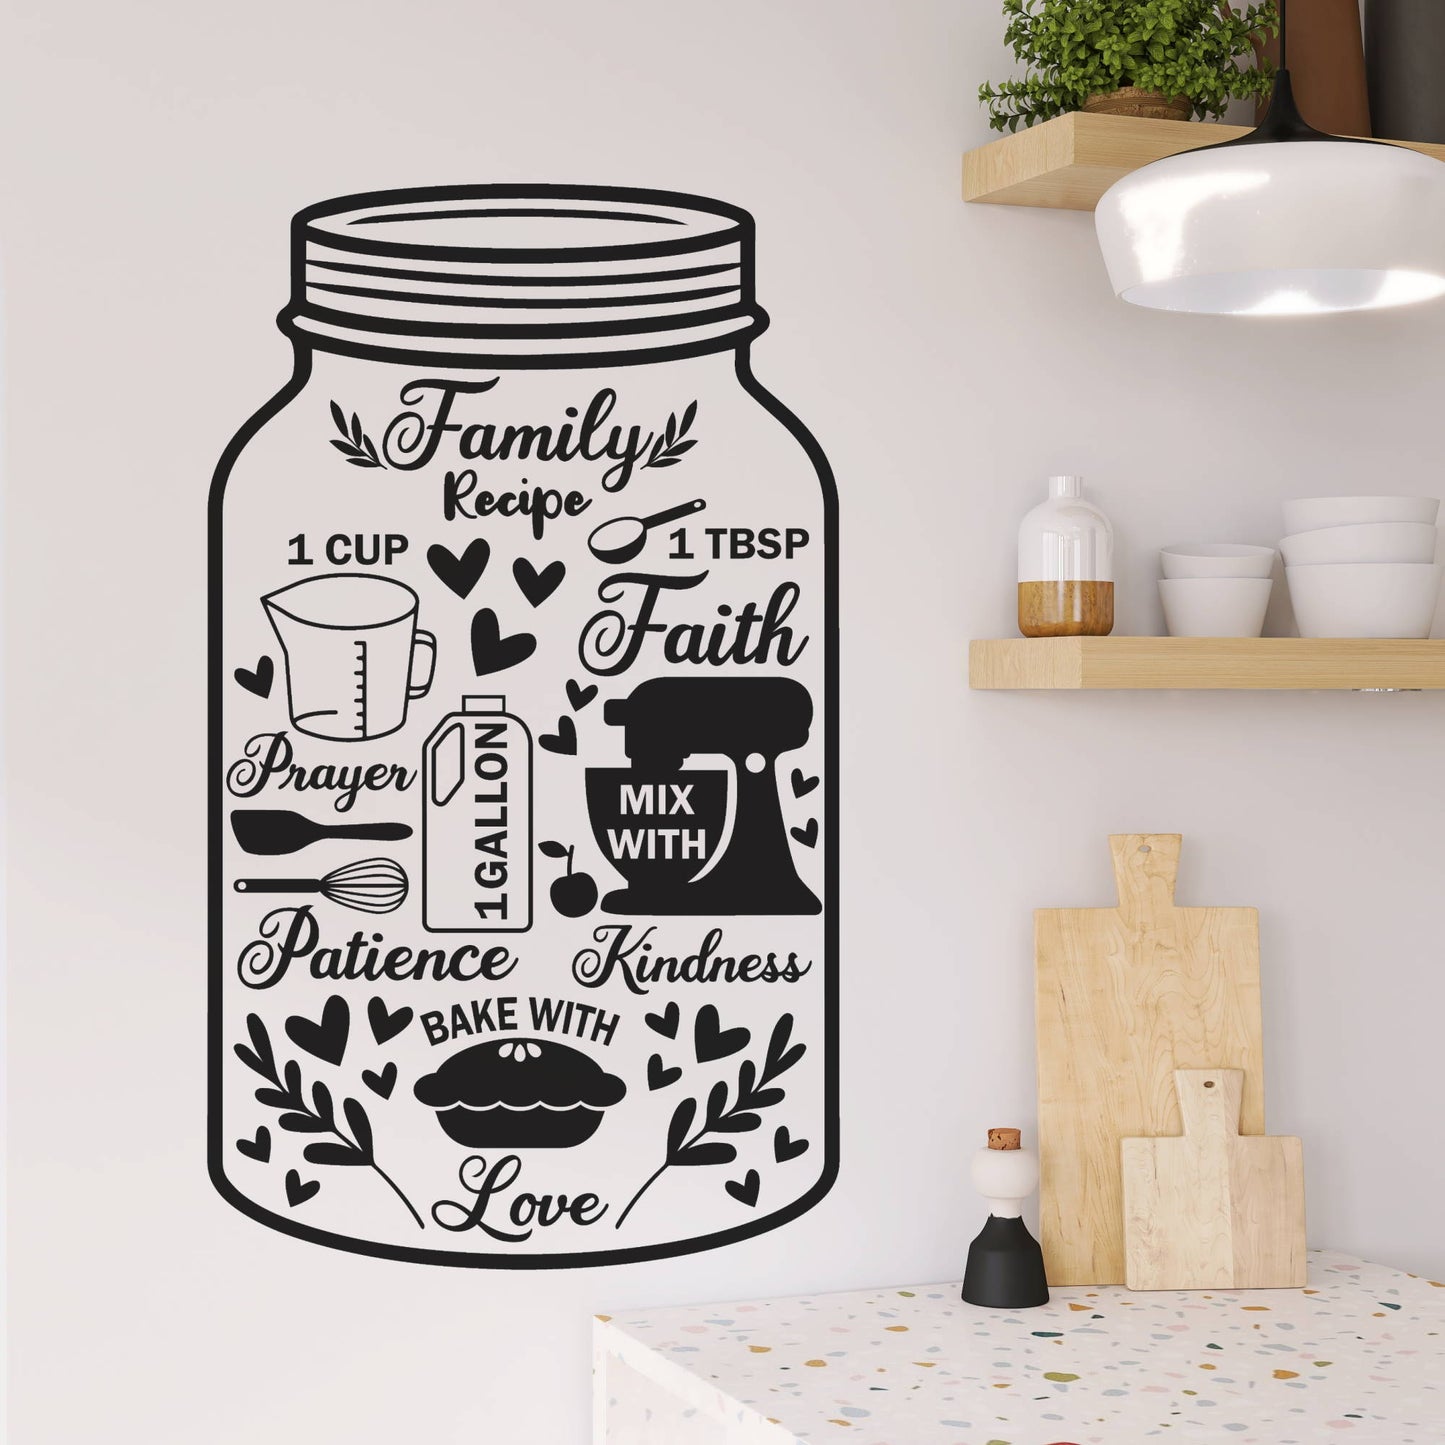 family recipe kitchen wall decal